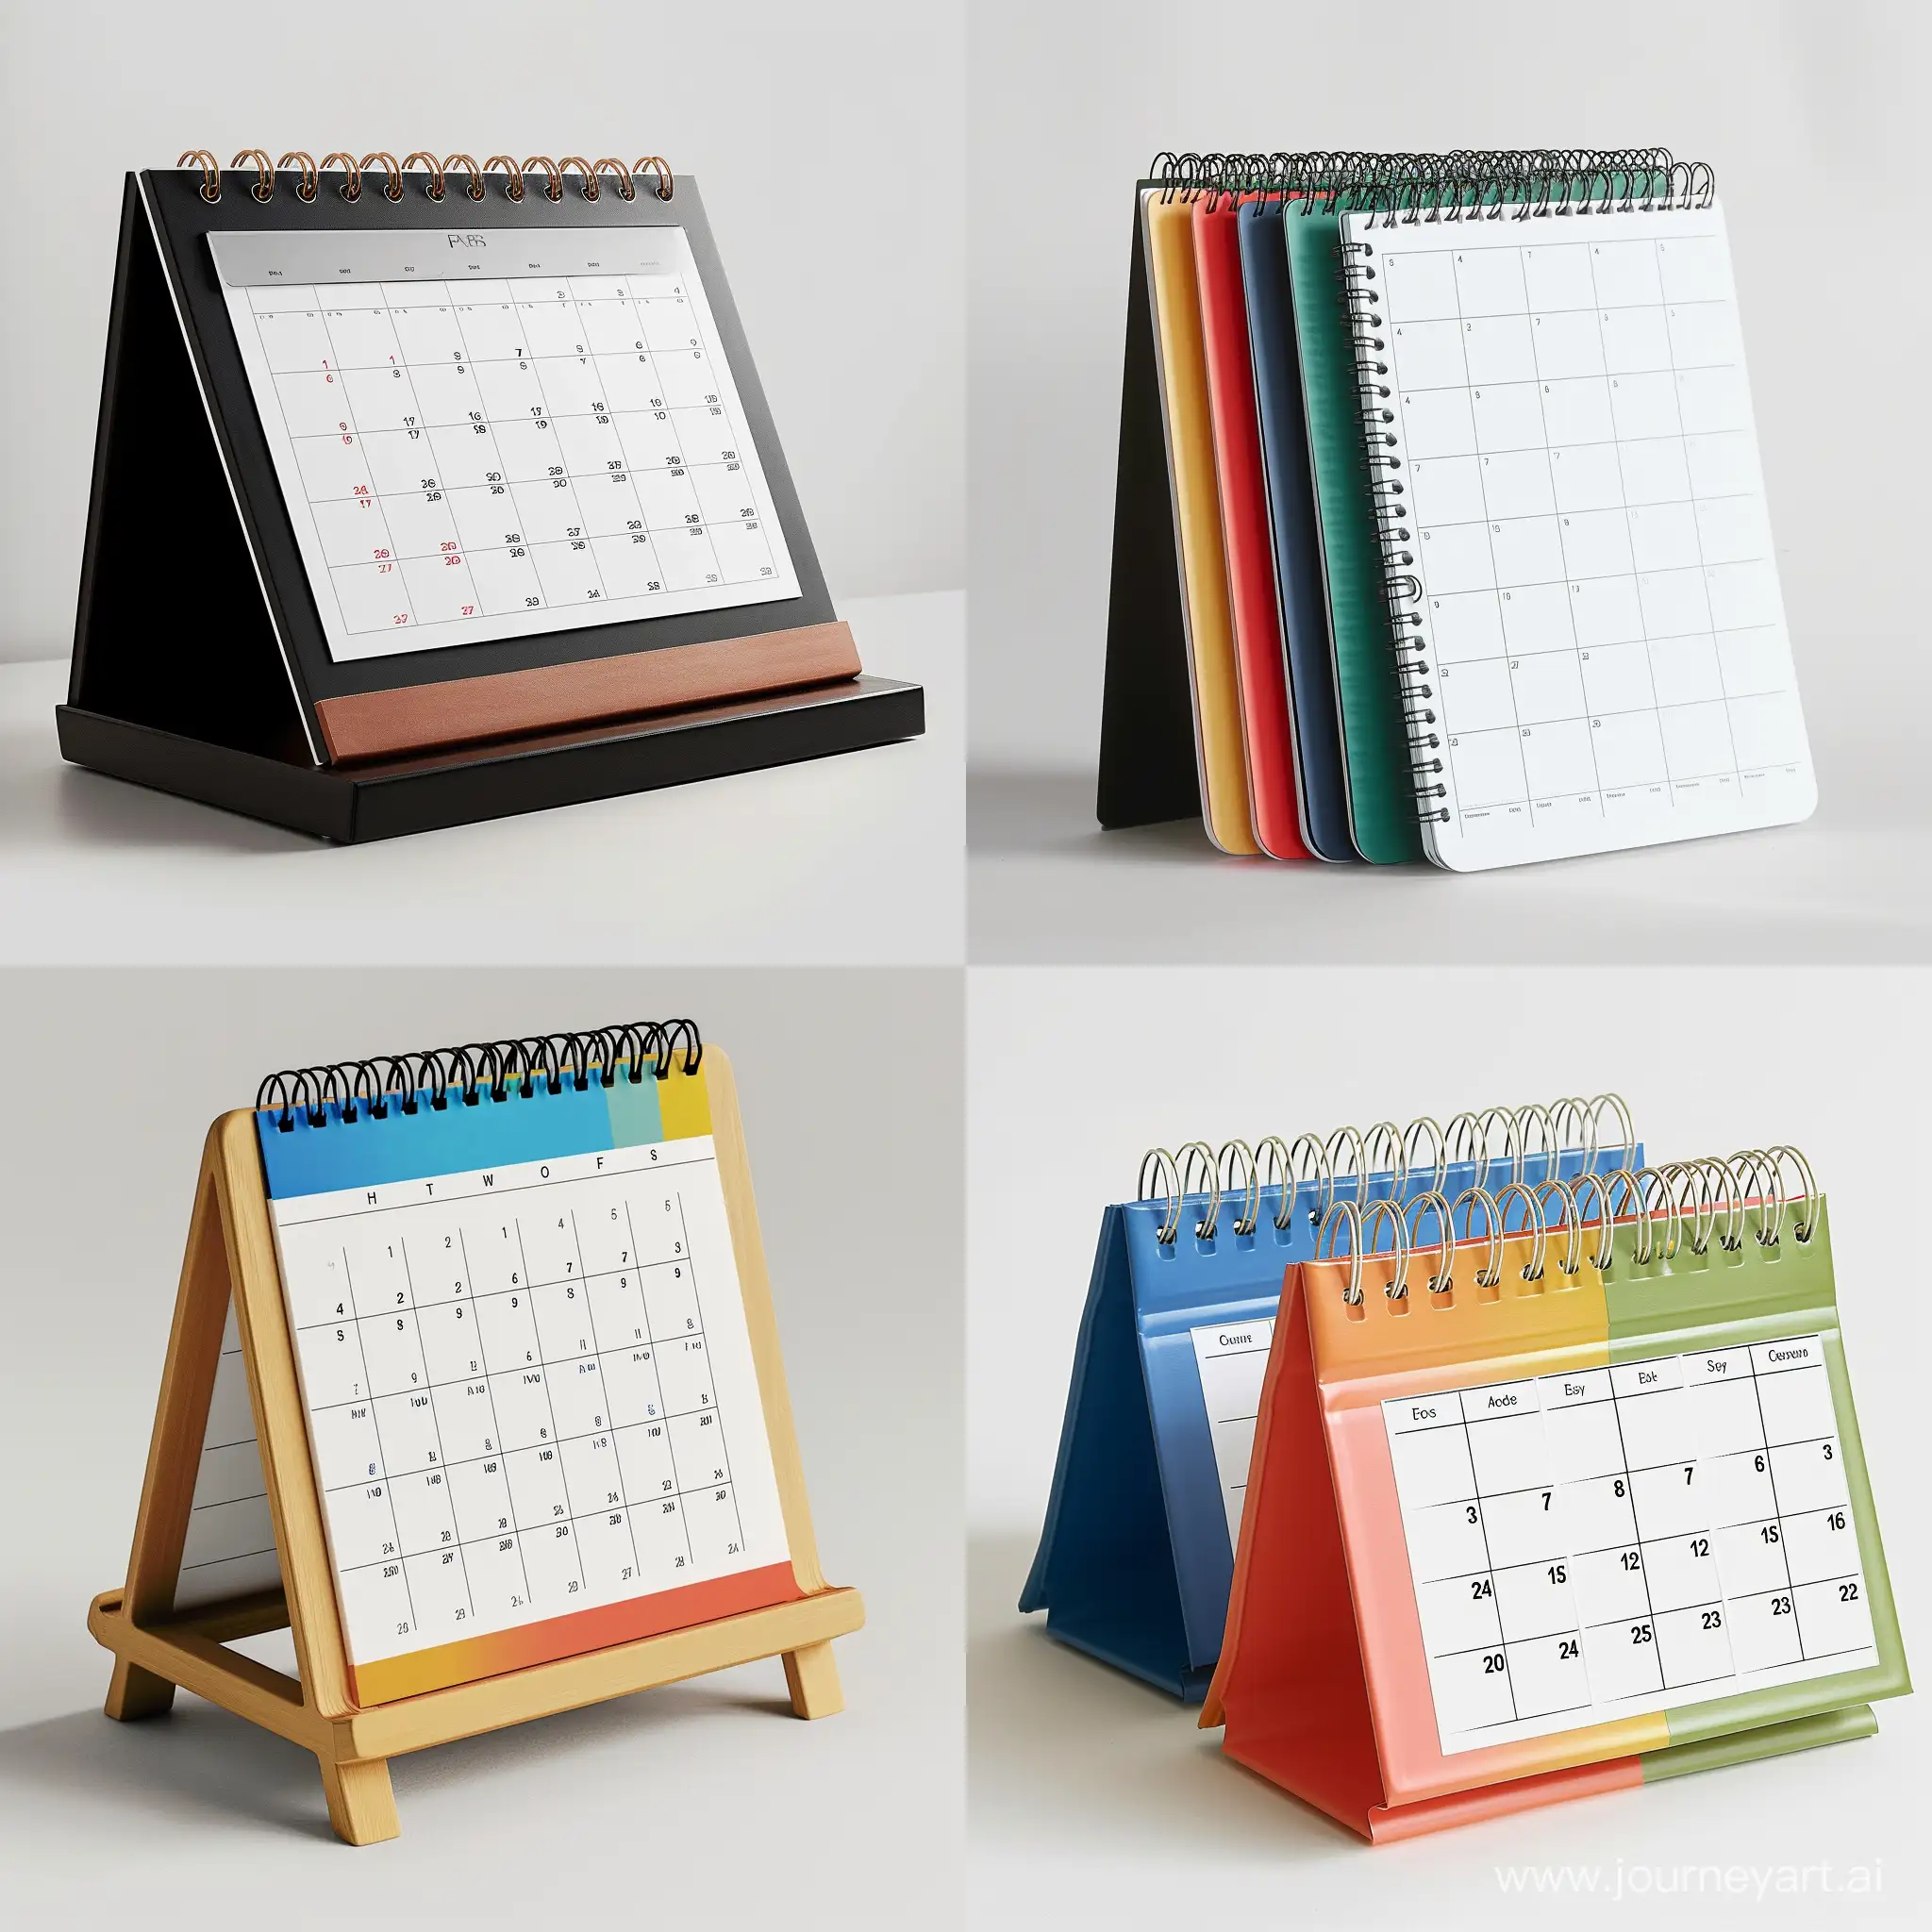 Personalized-Calendar-Desk-and-Wall-Design-Version-6